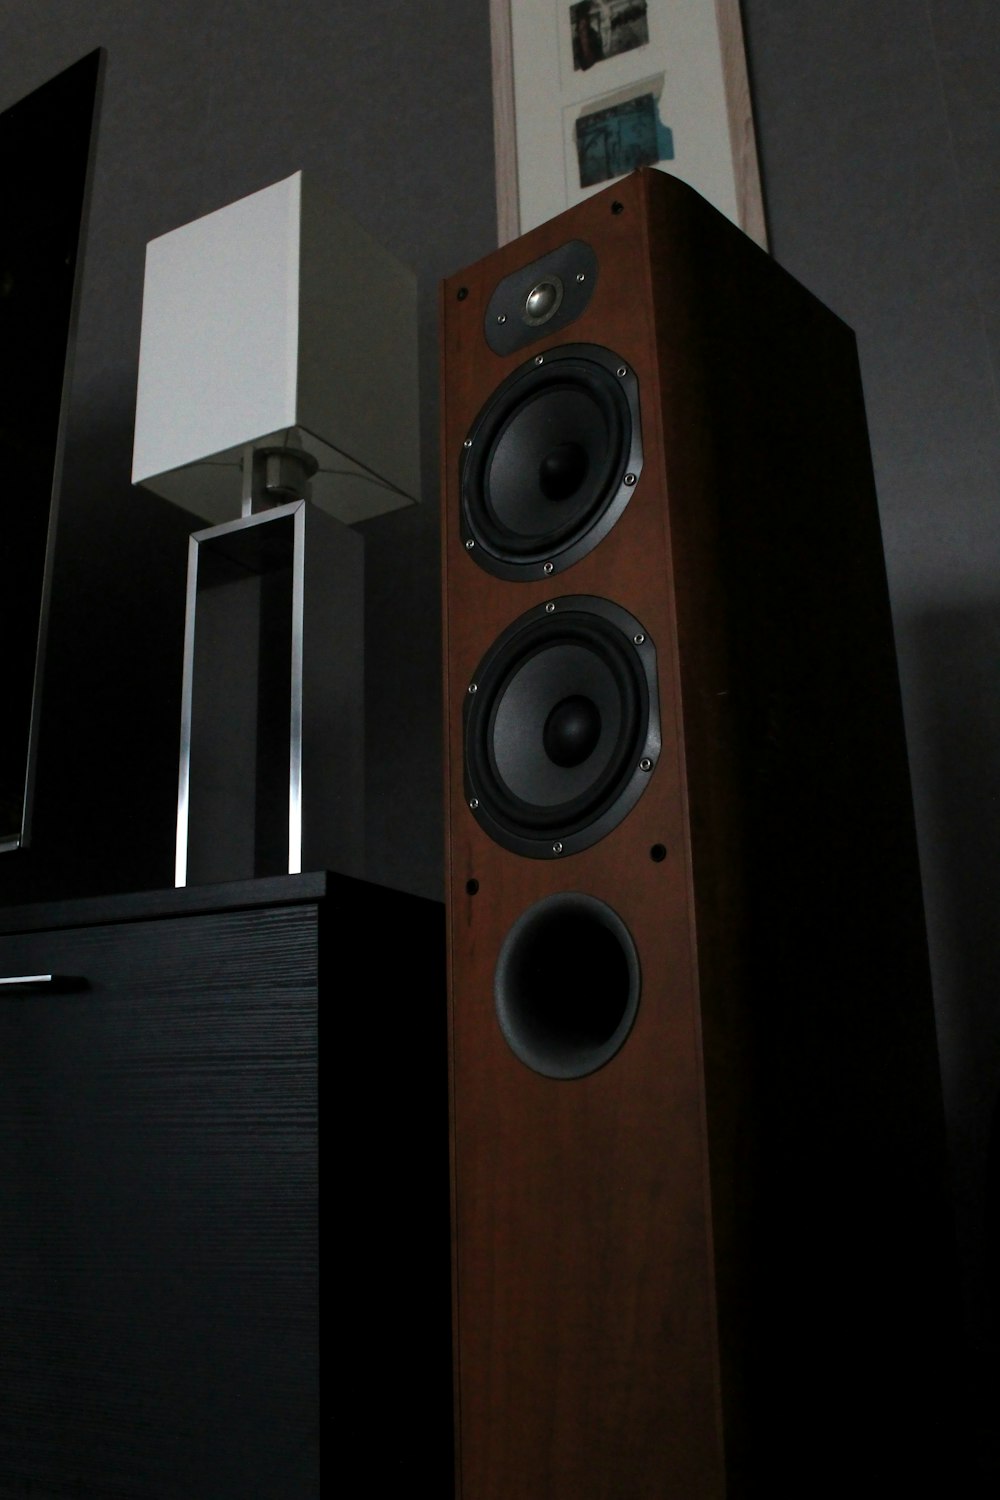 black and silver speaker on brown wooden cabinet